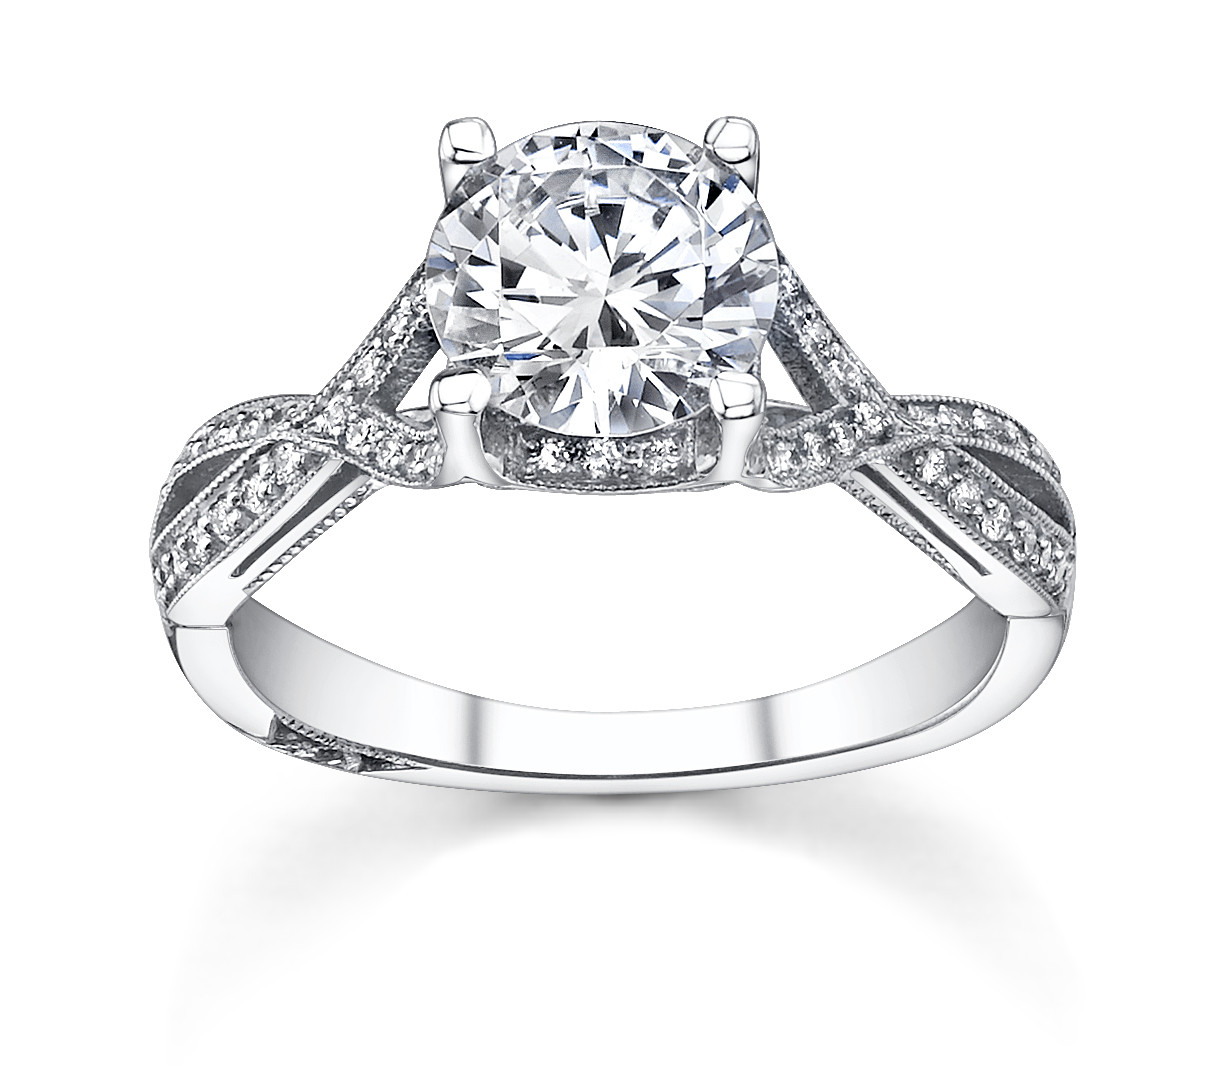 Wedding Ring Designers
 Expensive and trendy designer engagement rings